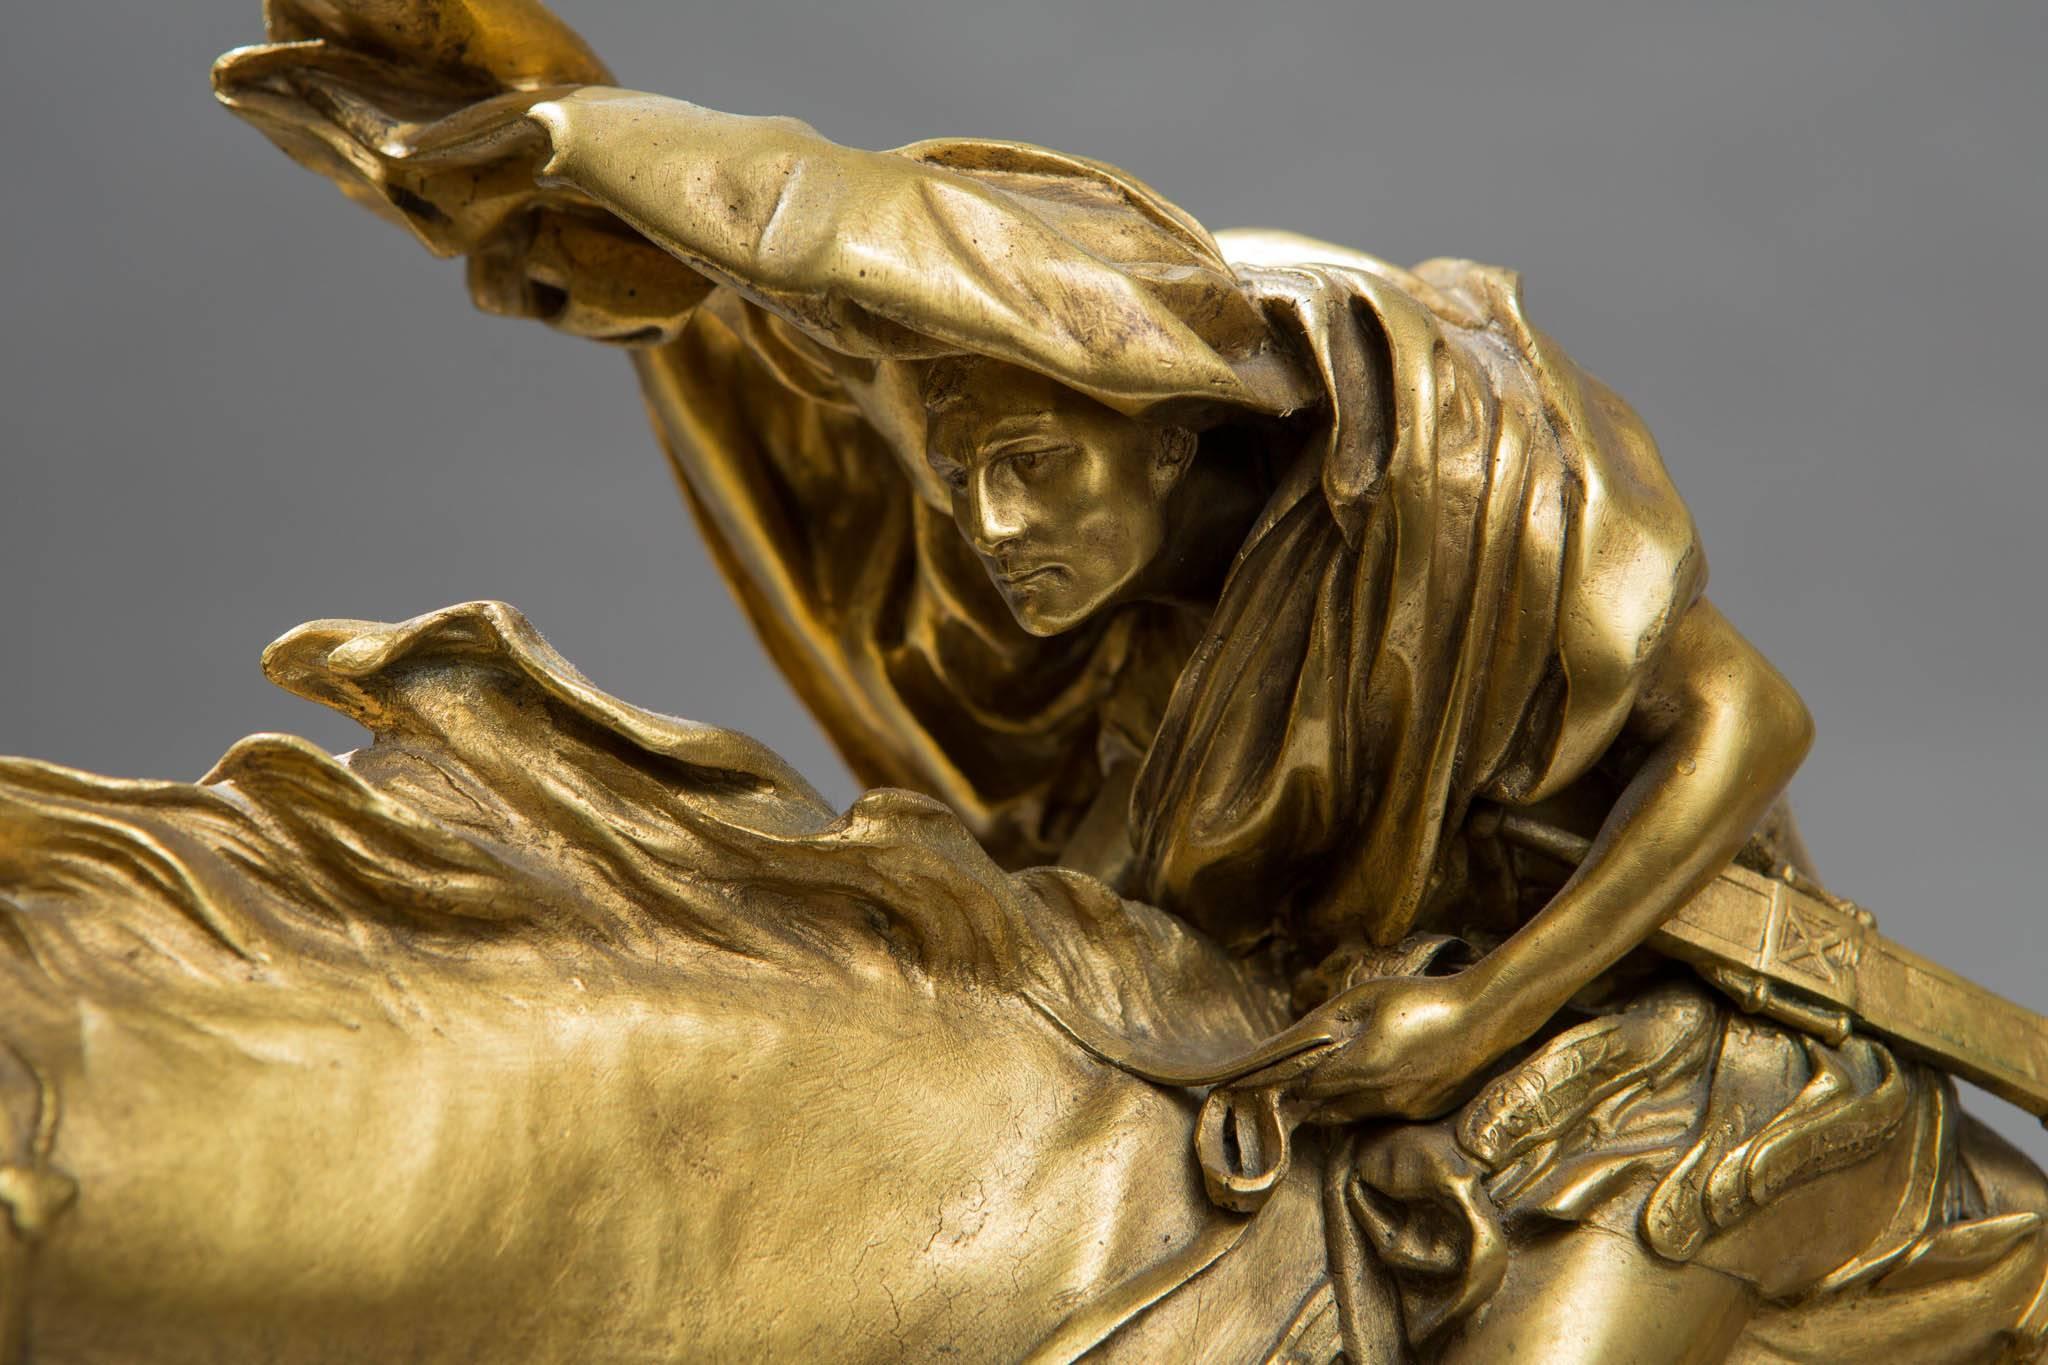 The gilt bronze sculpture depicting Julius Caesar on a horse crossing the Italian river Rubicon, which he famously did in 49 B.C. Cast by the famous French foundry, one side of the base reads ‘F. BARBADIENNE, FONDEUR PARIS FRANCE,’ whilst the other